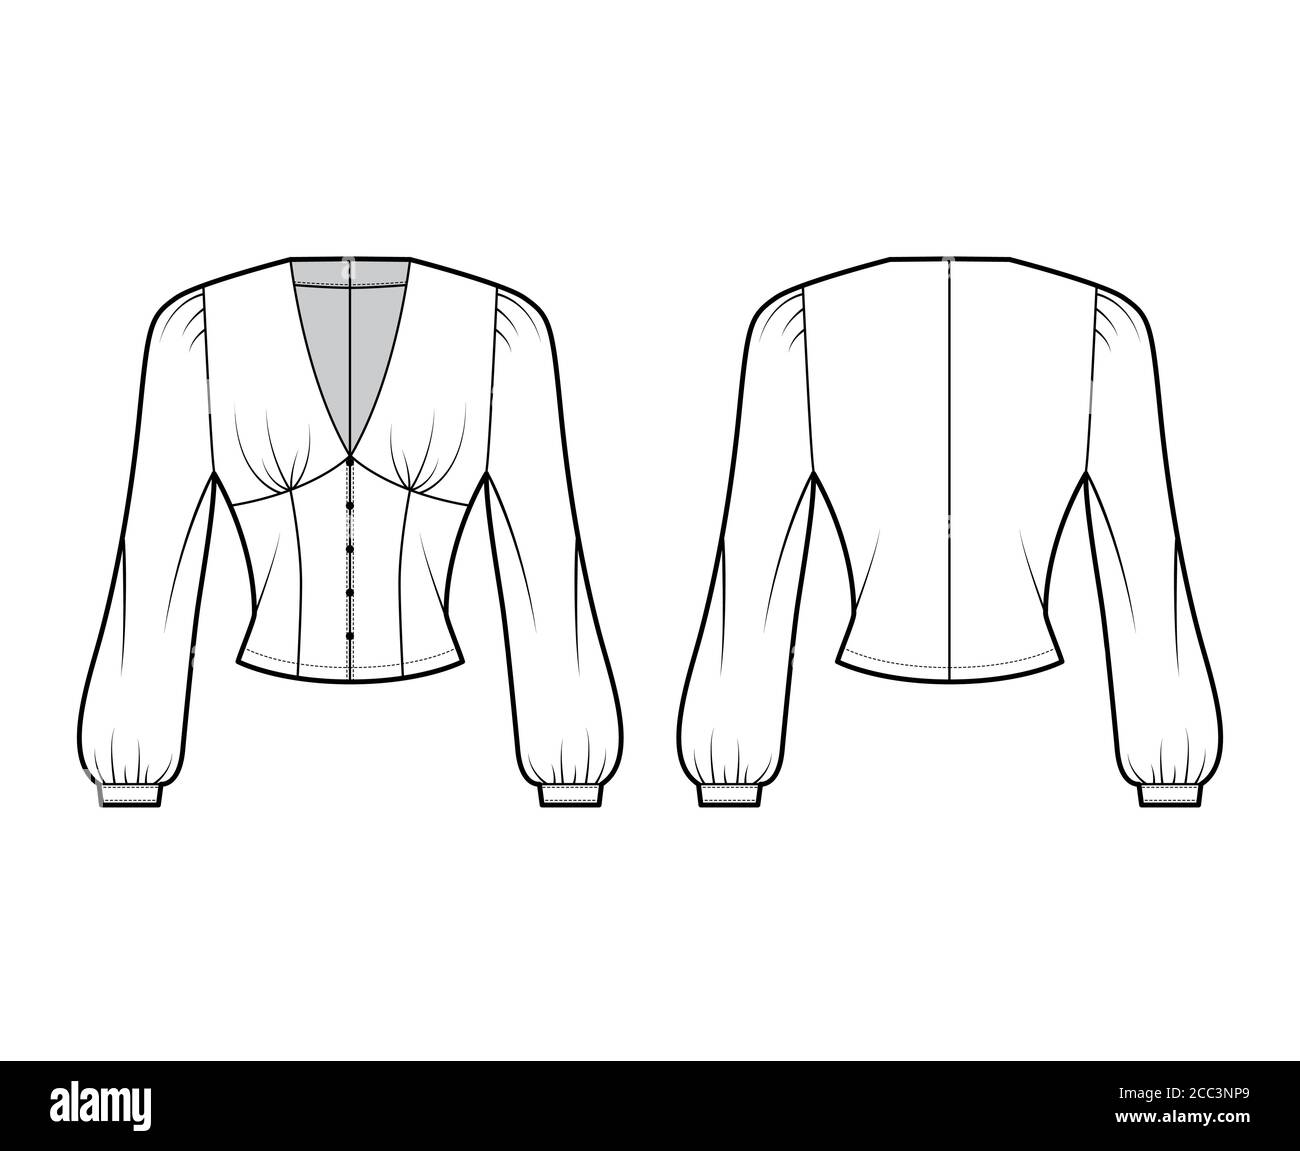 Blouse technical fashion illustration with long bishop sleeves ...